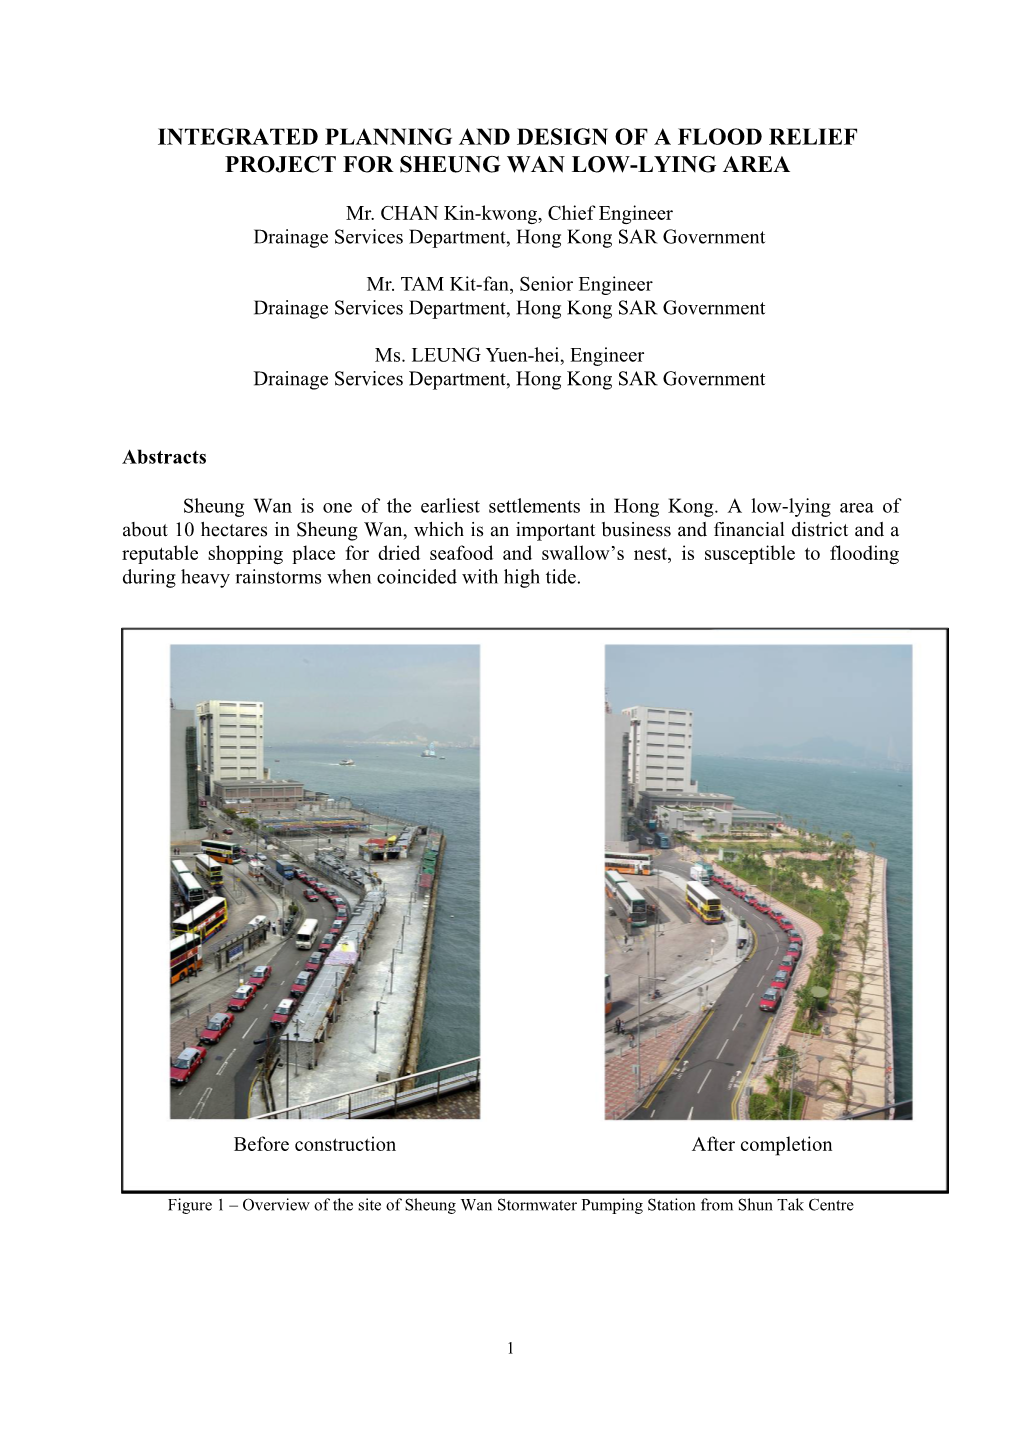 Integrated Planning and Design of a Flood Relief Project for Sheung Wan Low-Lying Area